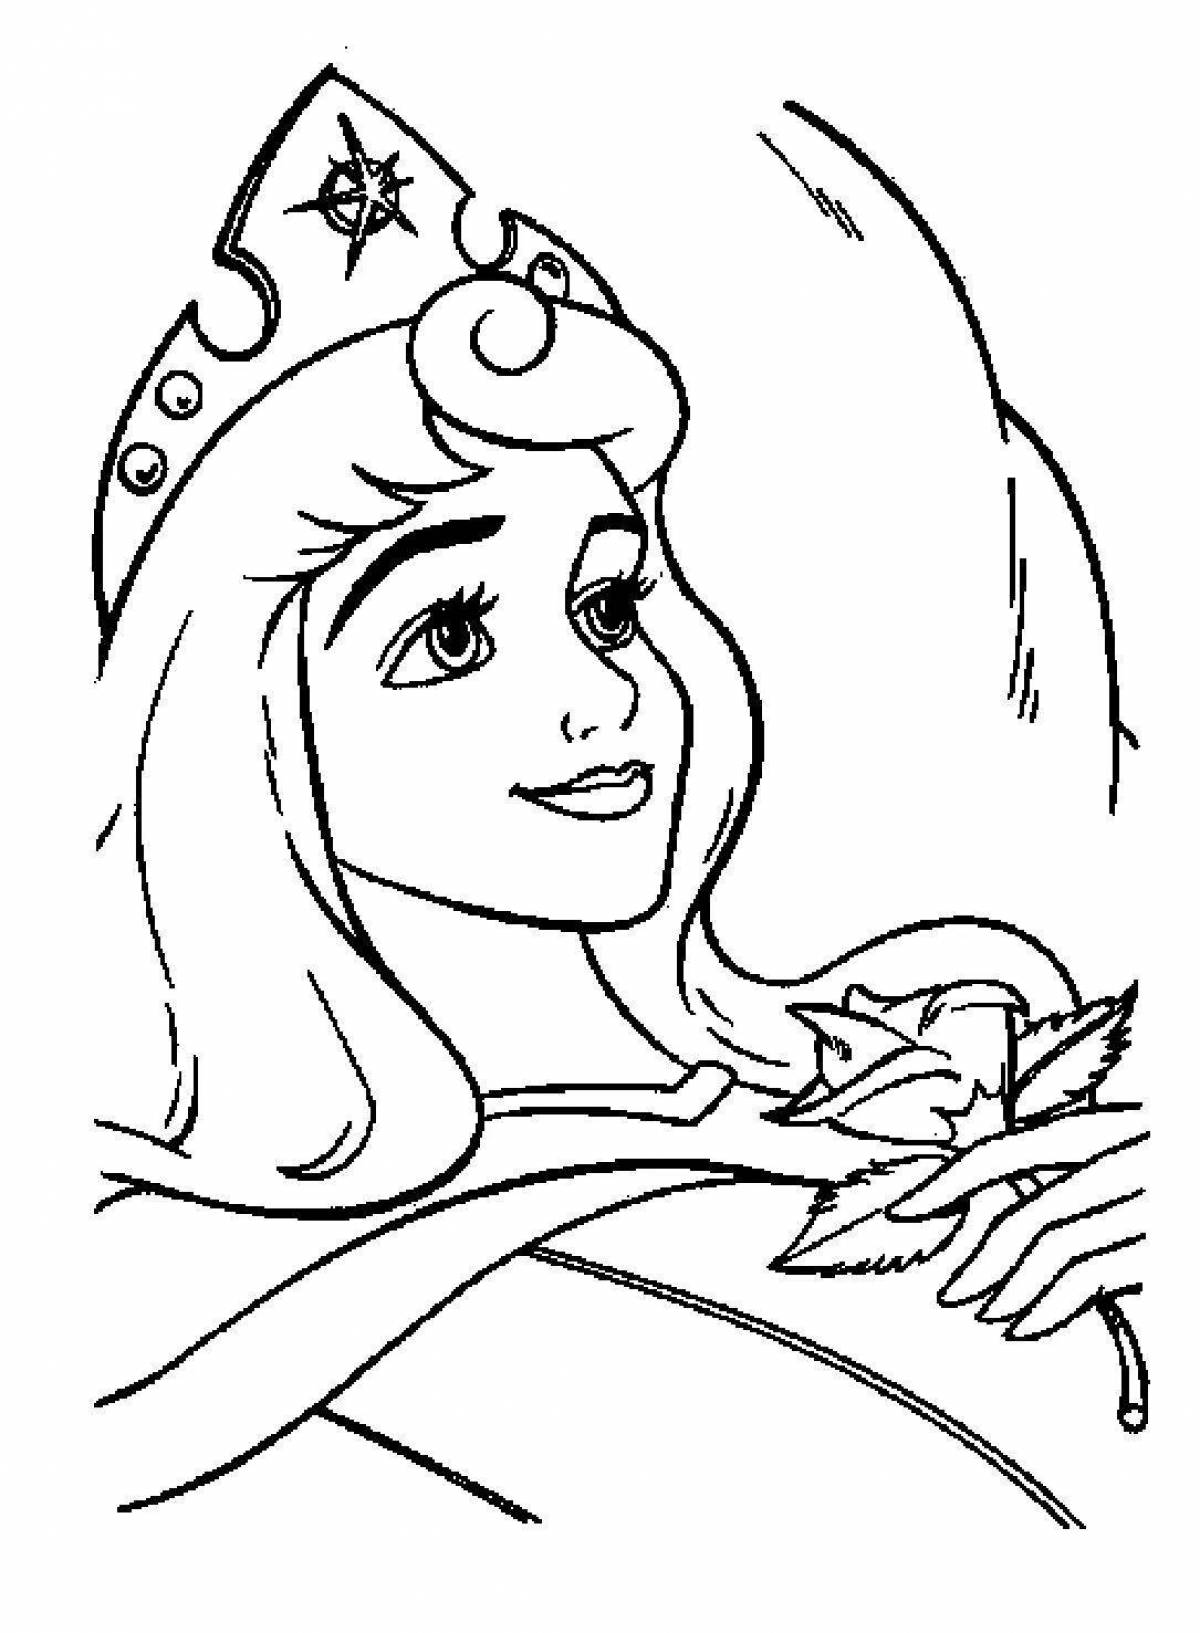 Exquisite sleeping beauty coloring book for kids